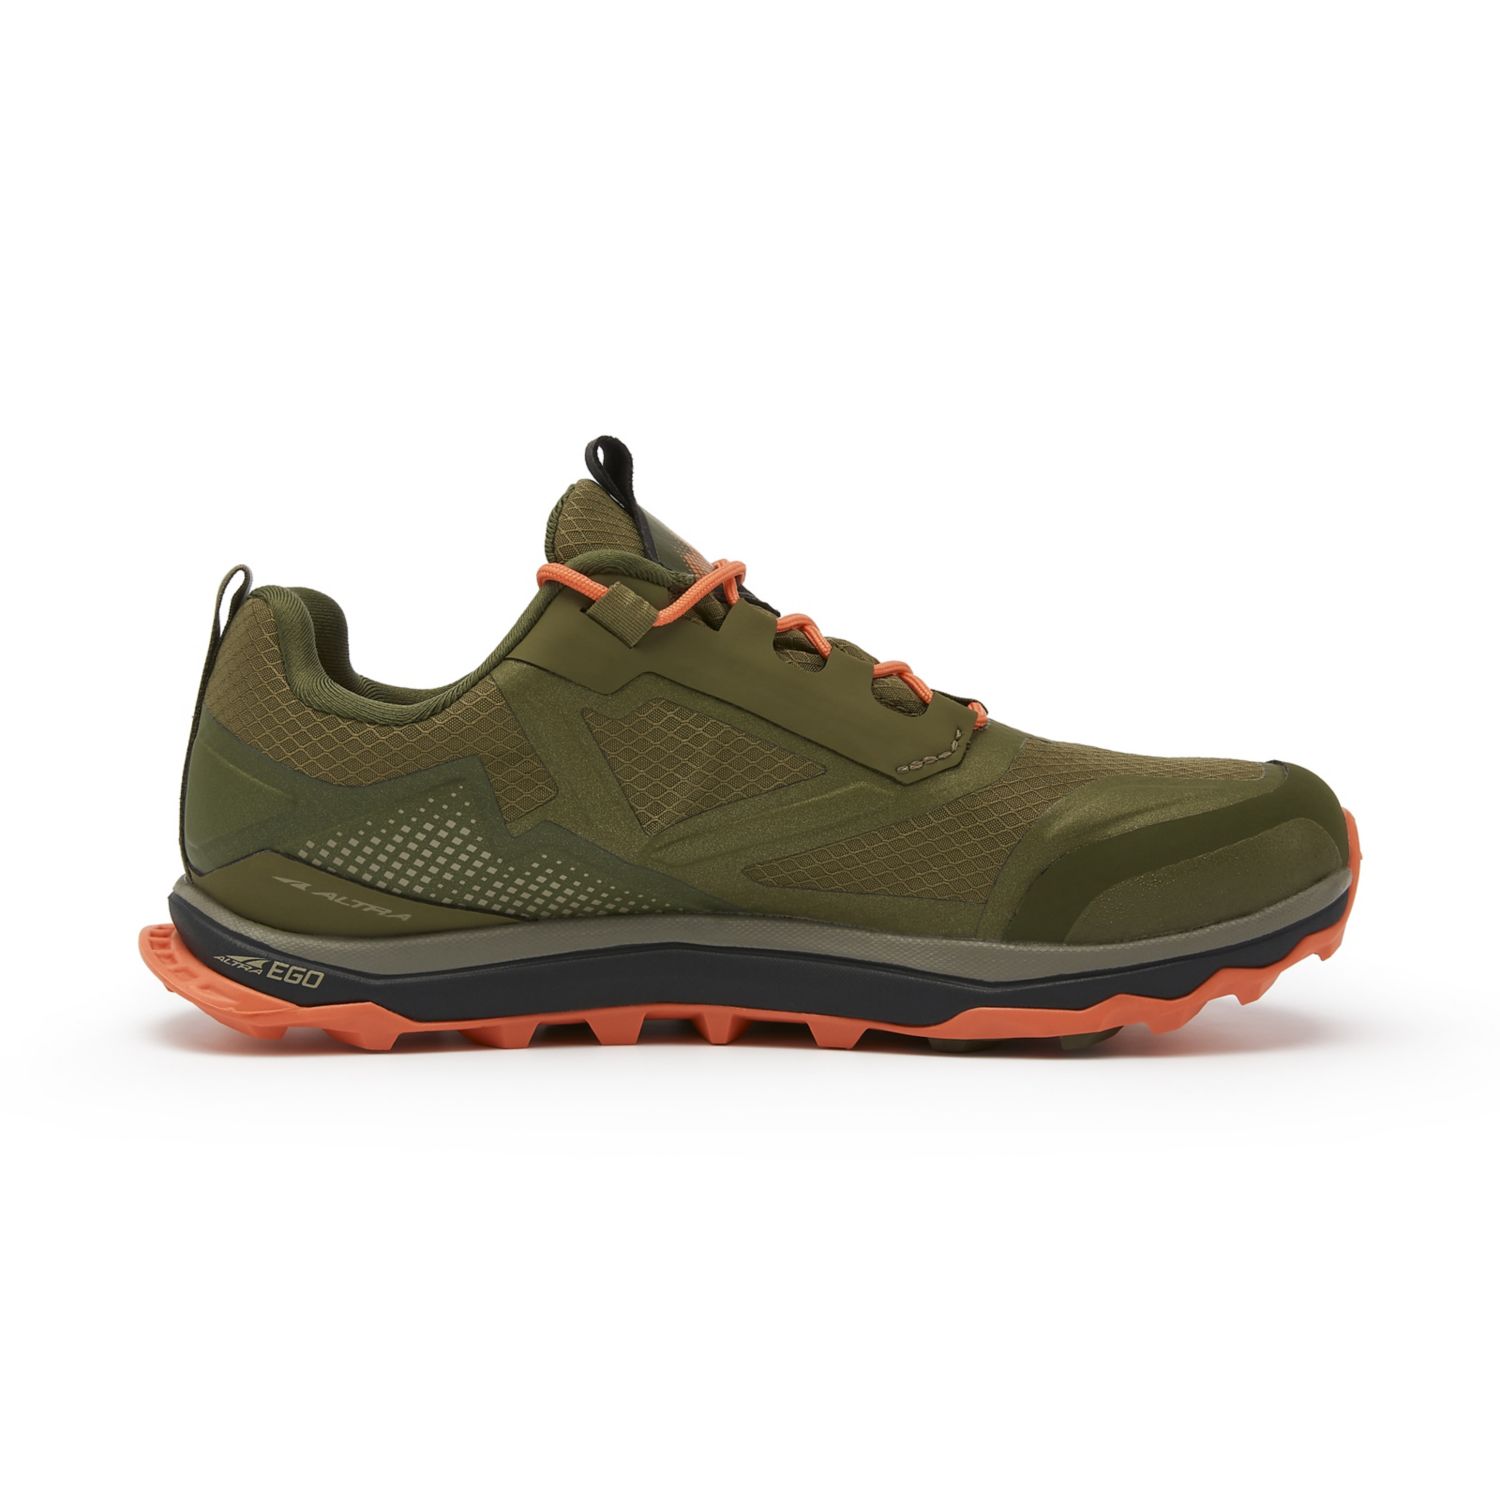 Olive Altra Lone Peak All-wthr Low Women's Trail Running Shoes | Ireland-79803129